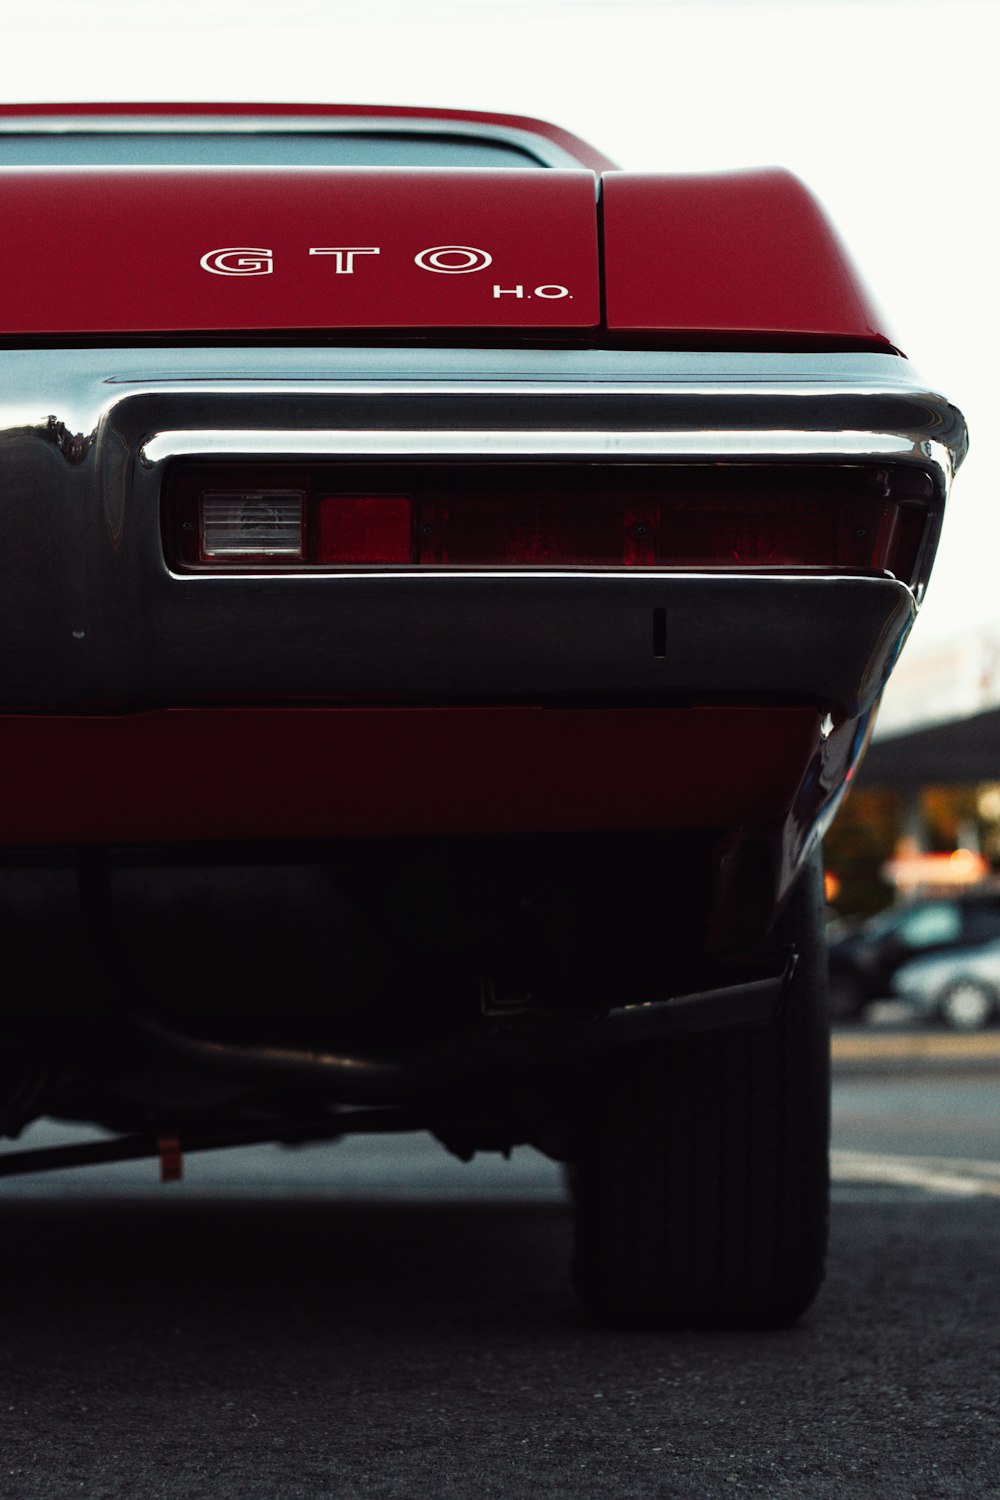 a close up of the rear end of a red car